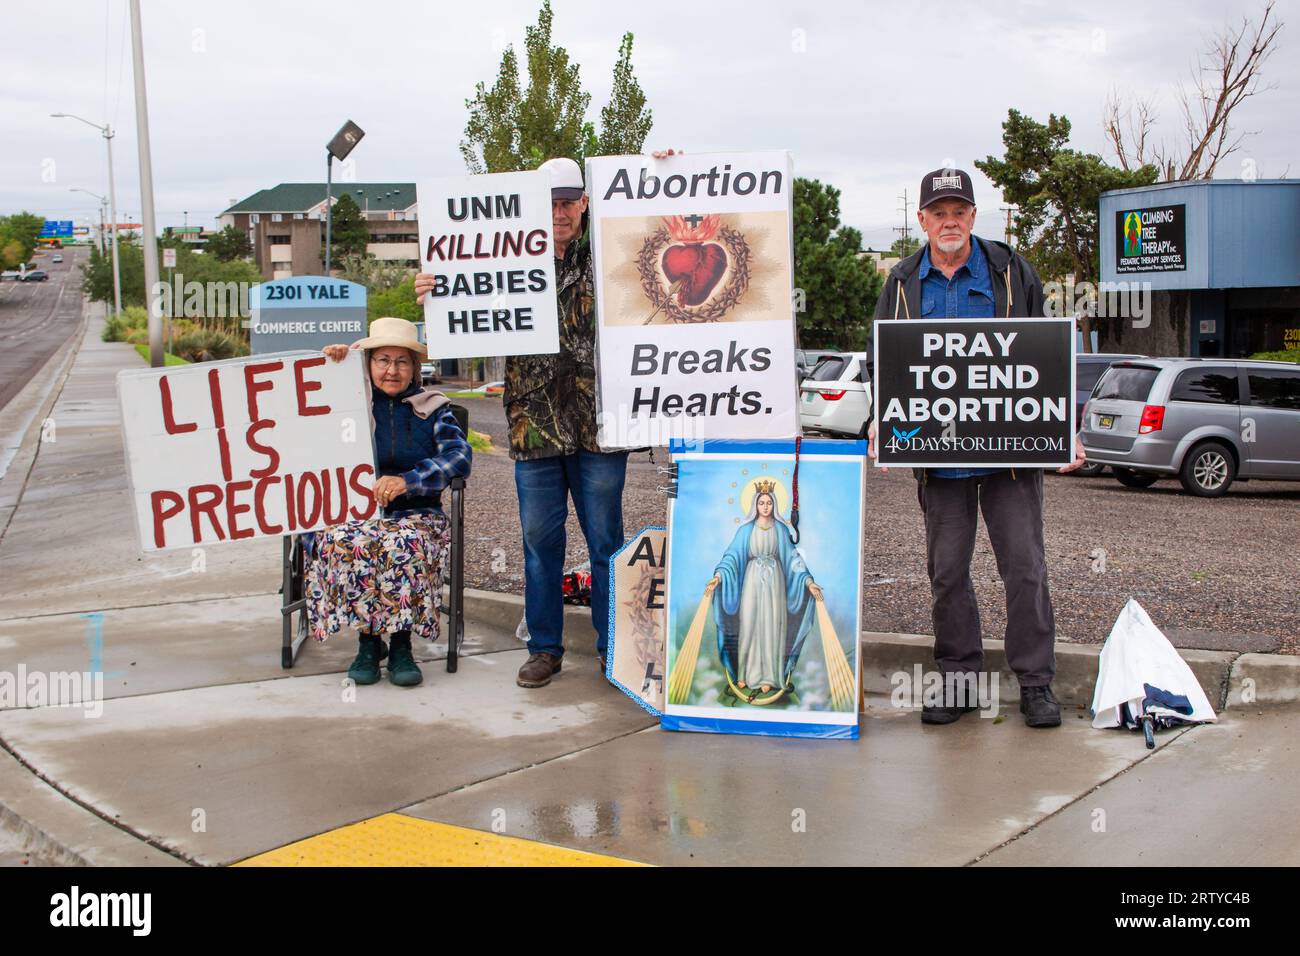 Senior protestors stand on street corner in Albuquerque, New Mexico, holding anti-abortion pro-life signs and a large image of Mother Mary. Stock Photo